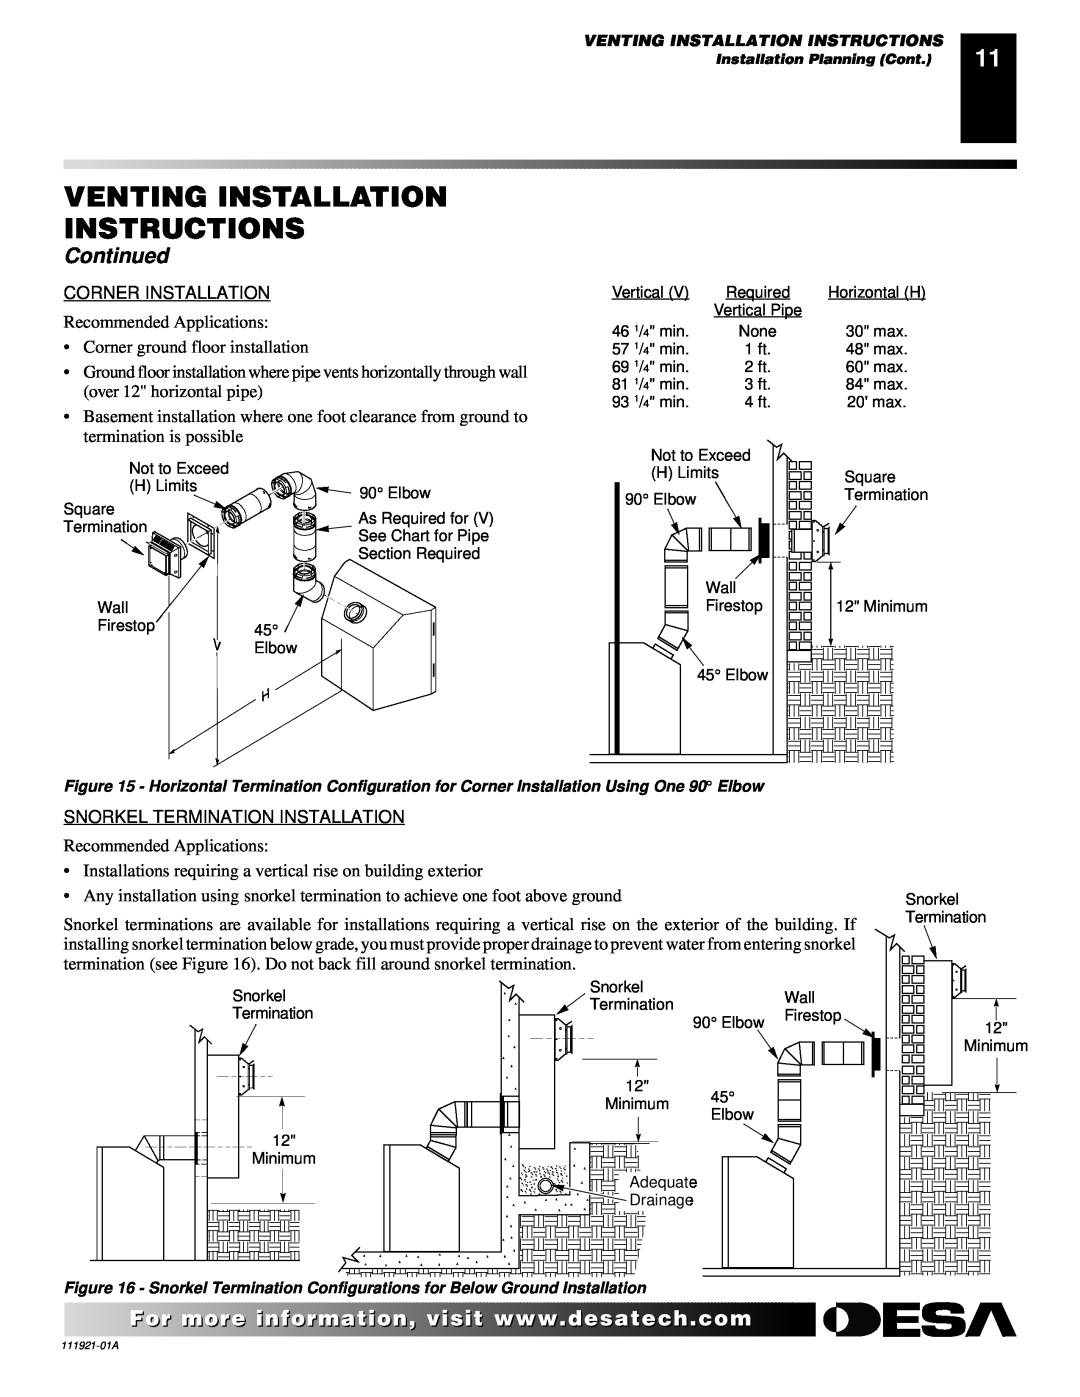 Desa (V)K42N installation manual Venting Installation Instructions, Continued, Recommended Applications 